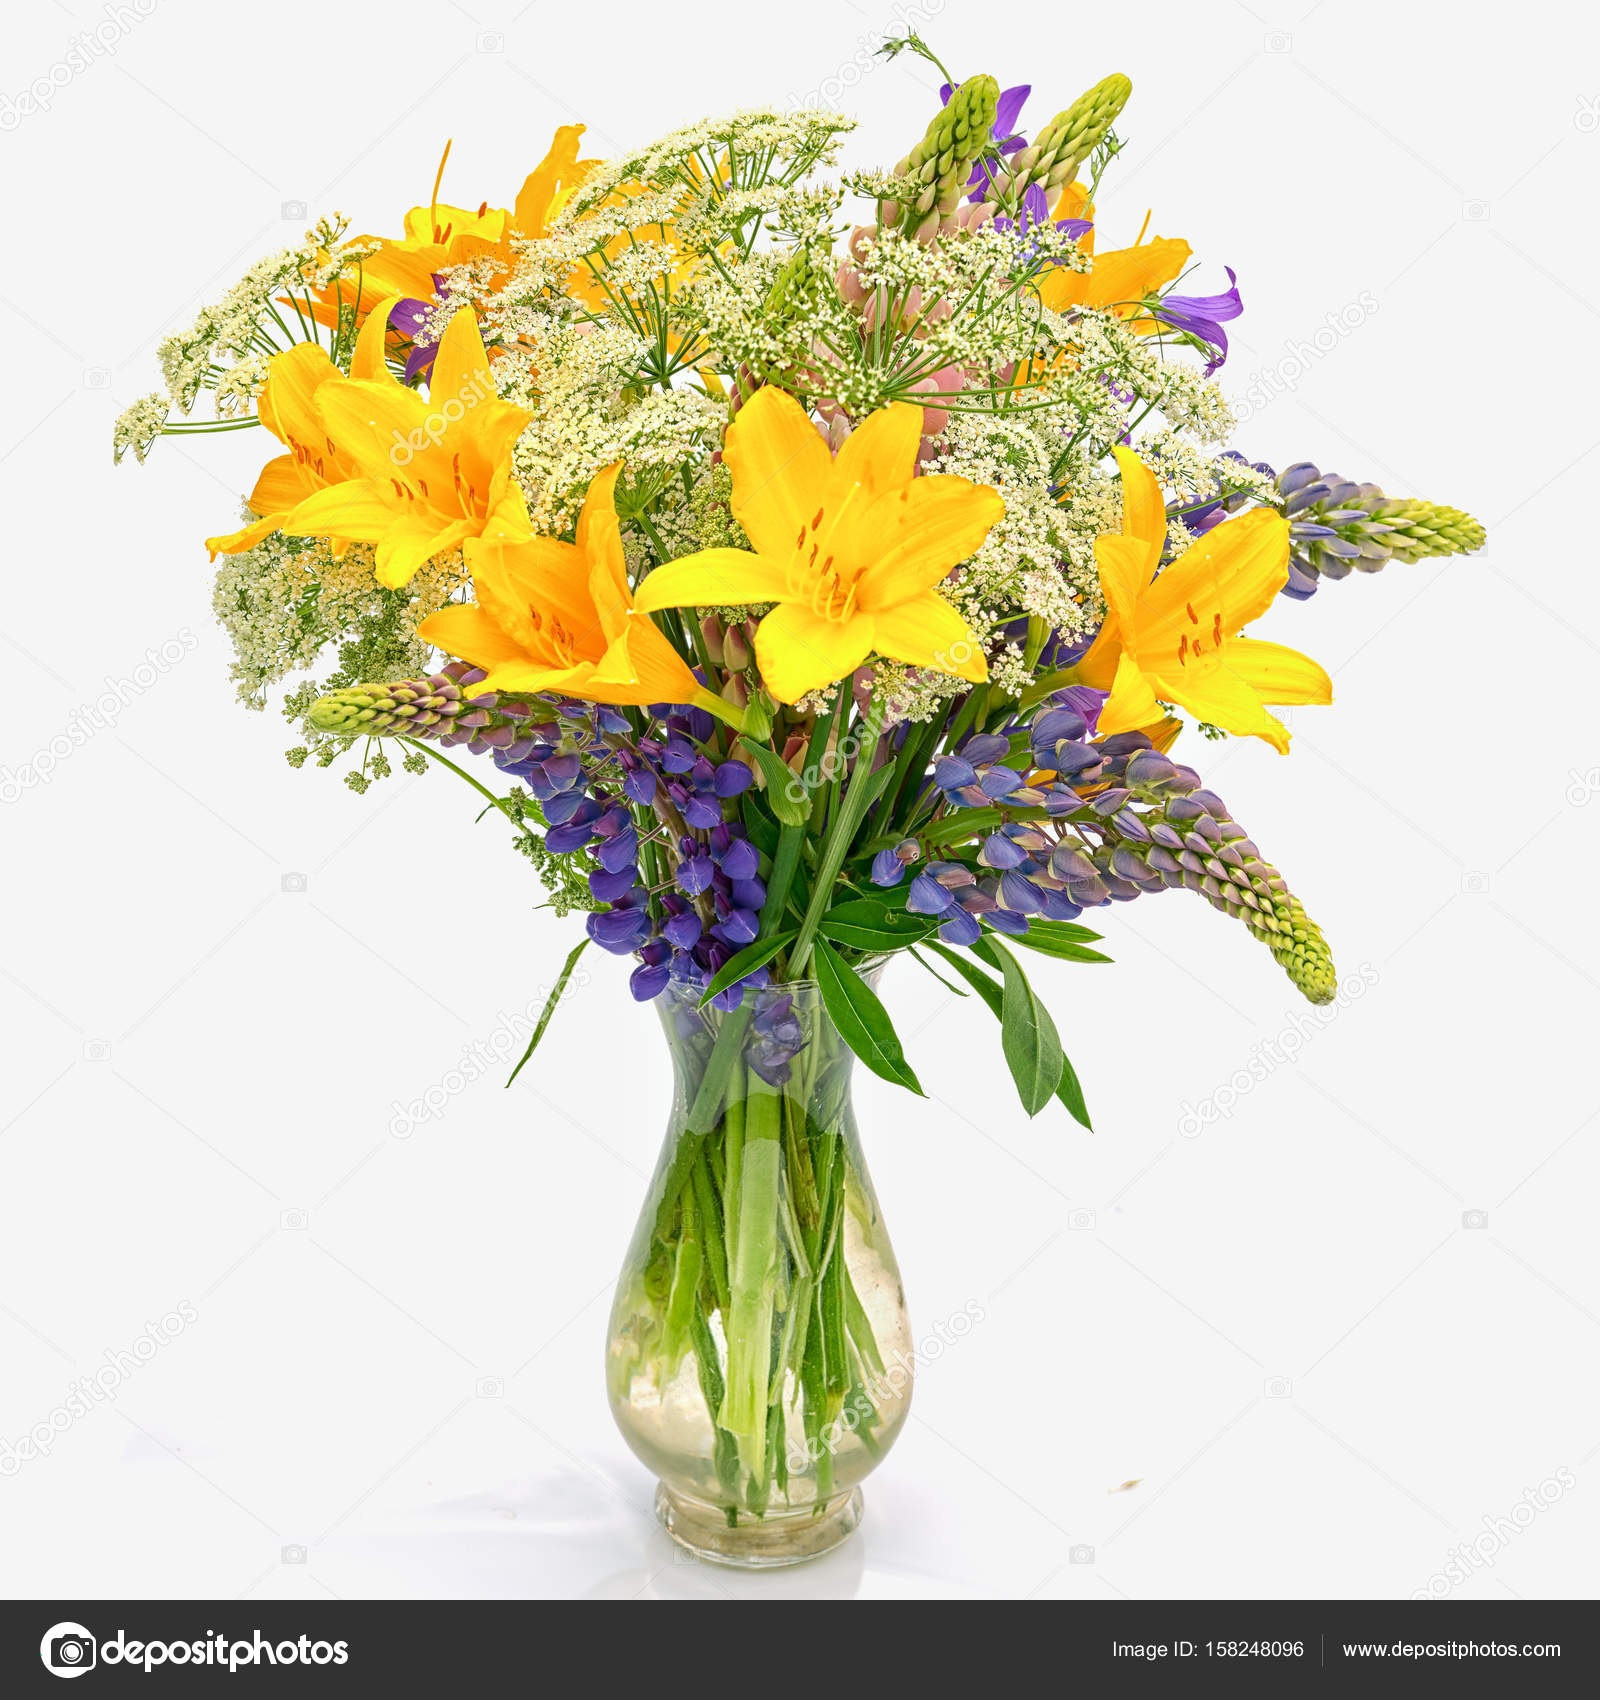 forest green glass vase of inspiring images of flower bokays natural zoom regarding bouquet od wild flowers achillea millefolium day lily and lupine in a transparent glass vase isolated